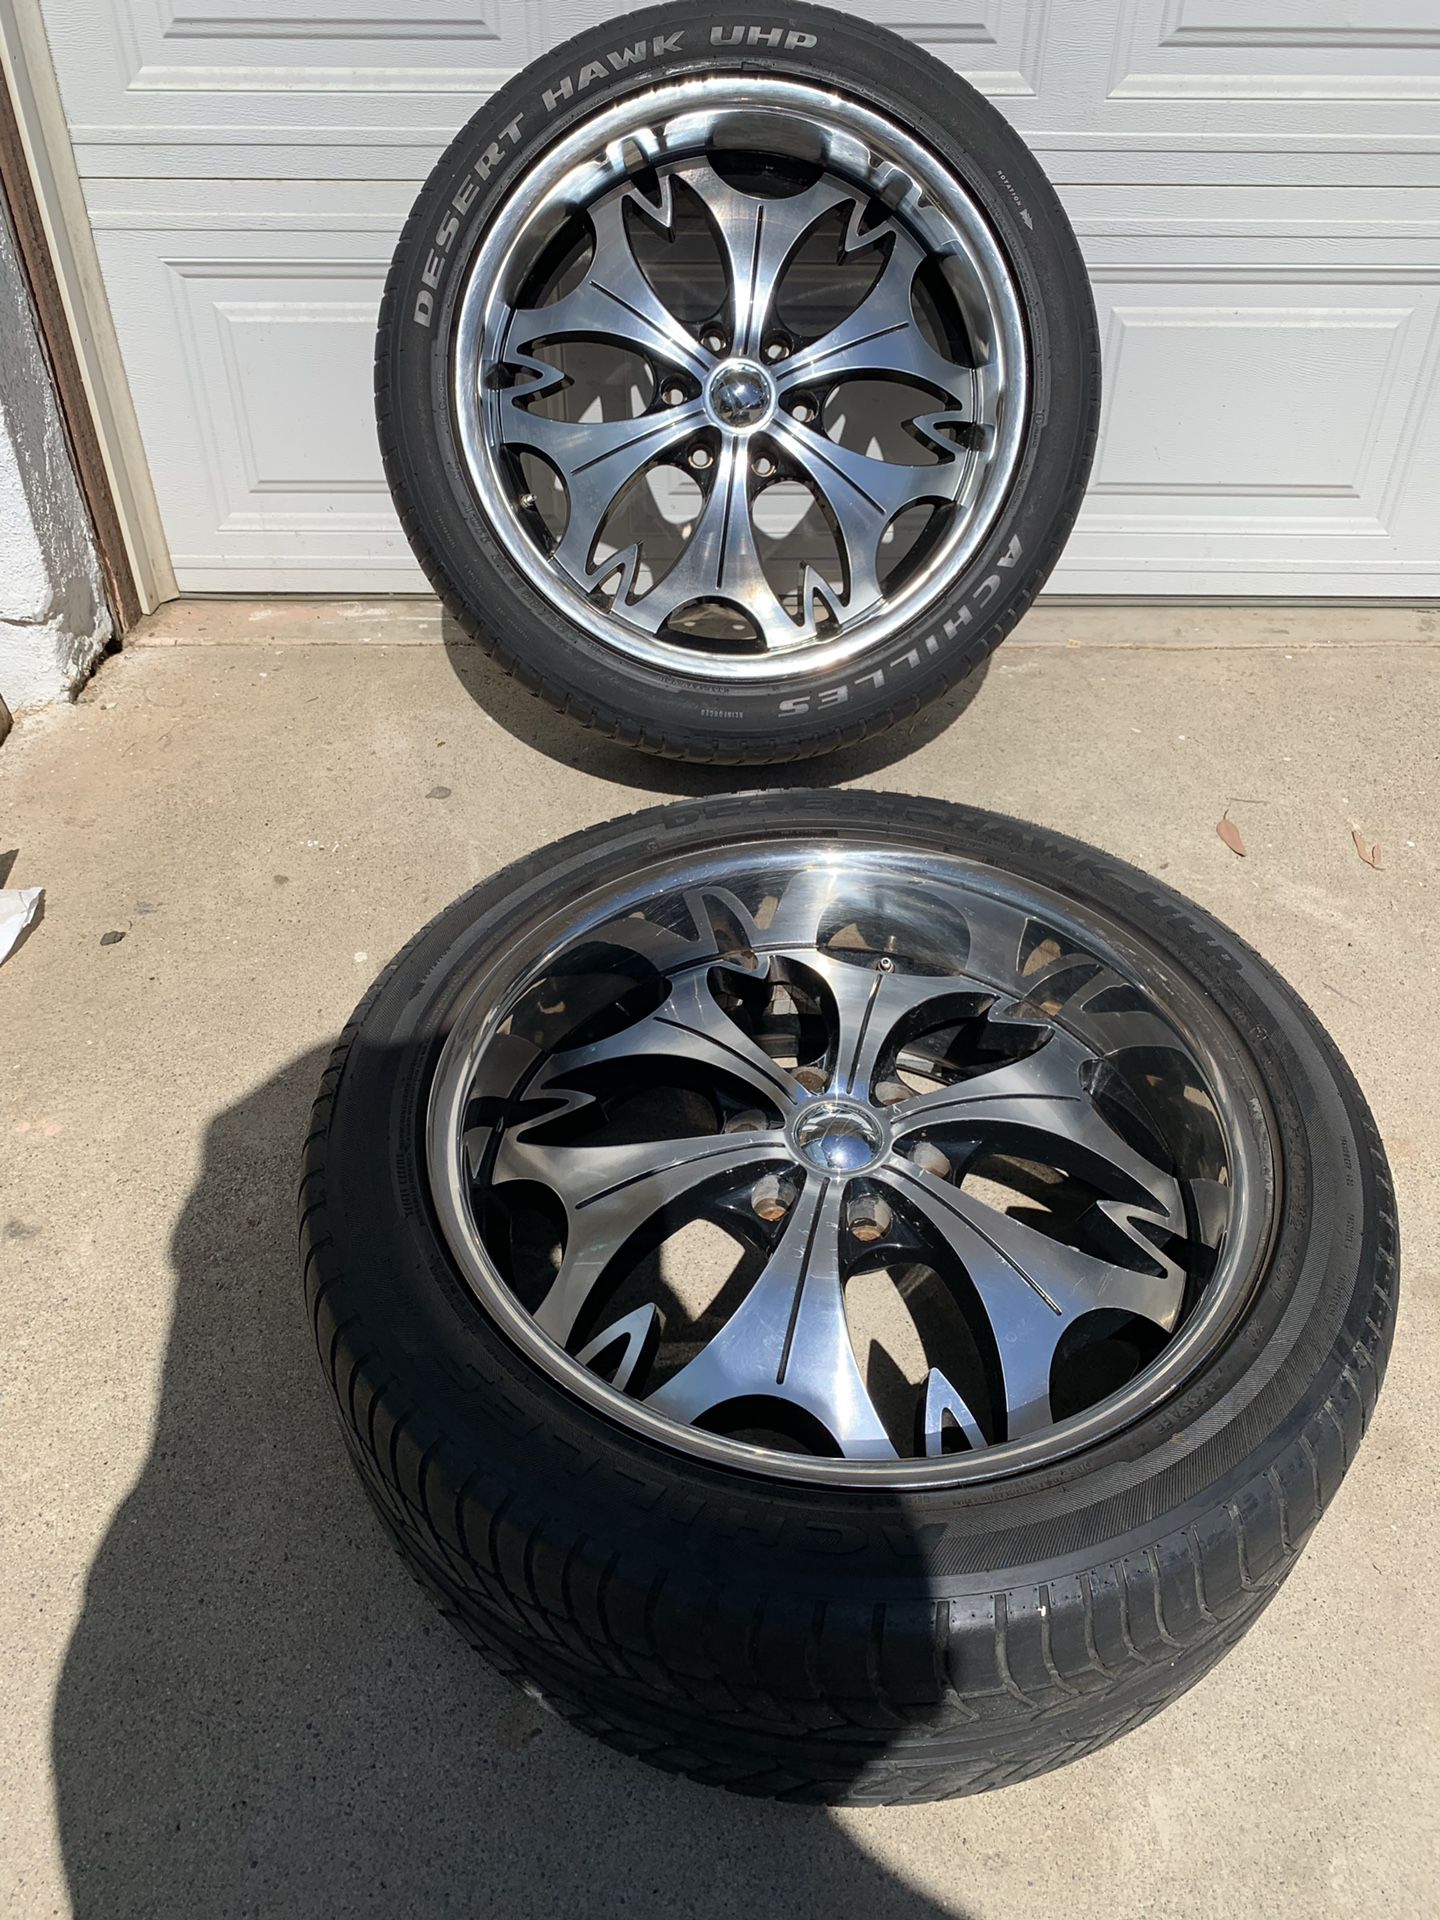 22 inch rims and tires for Silverado or Tahoe or other